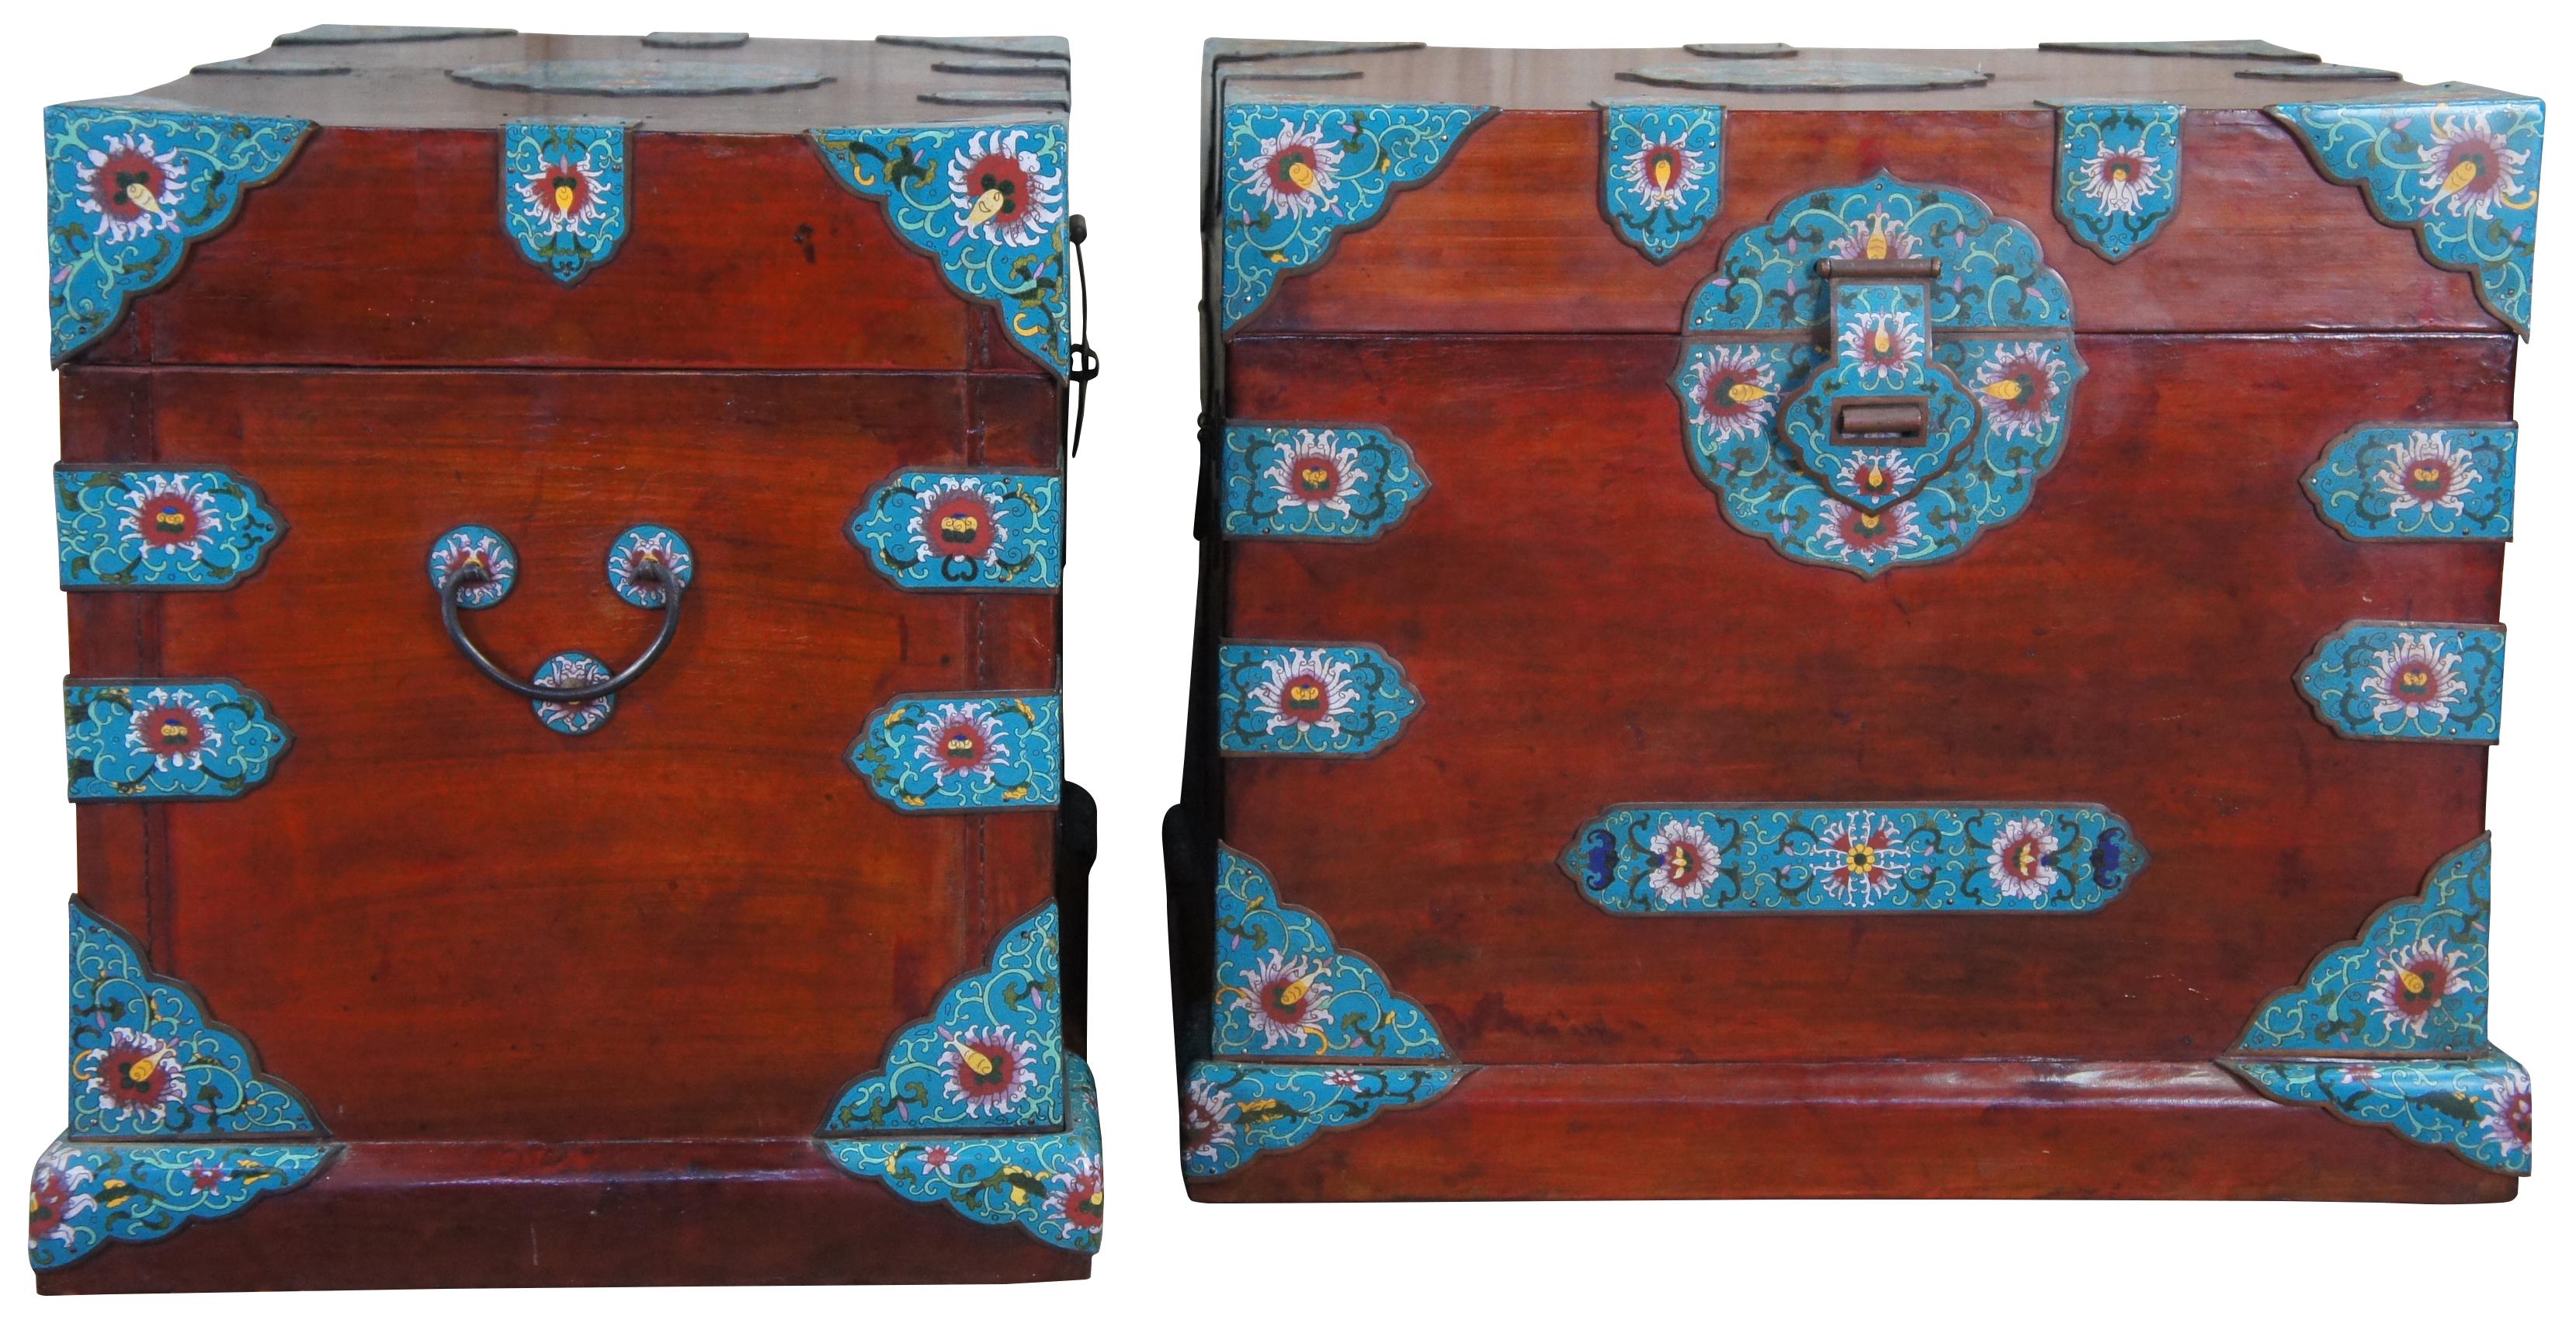 Pair of two 20th century Chinese blanket chests or trunks. Made of Camphor wood bound with ornate cloisonne that features a turquoise field with floral accents. Each containing one tray and iron handles. Purchased in Seattle WA in the